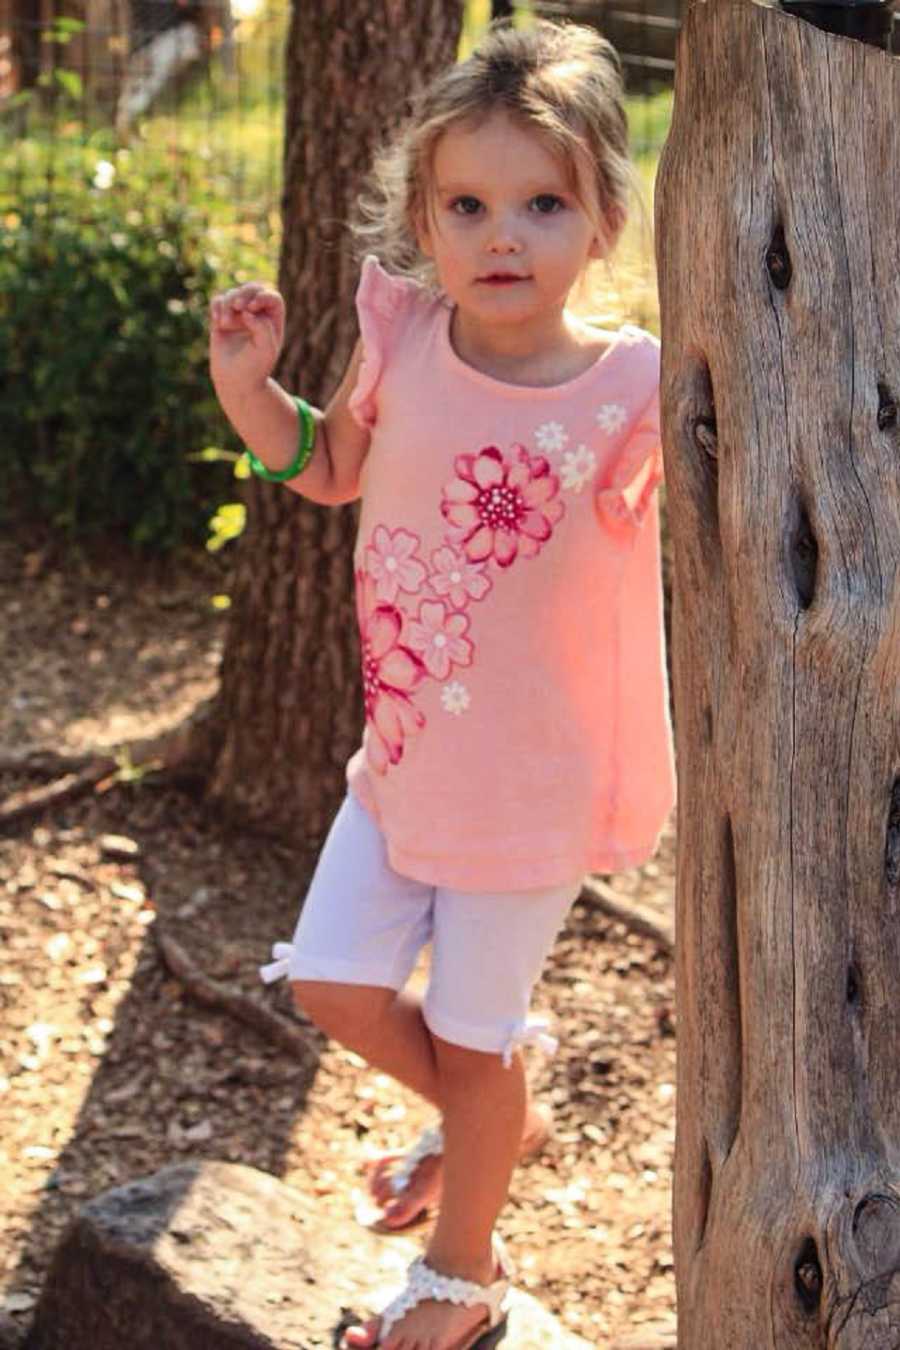 Little girl who was taken in by her hand stands leaning against tree wearing pink shirt with flowers and white shorts